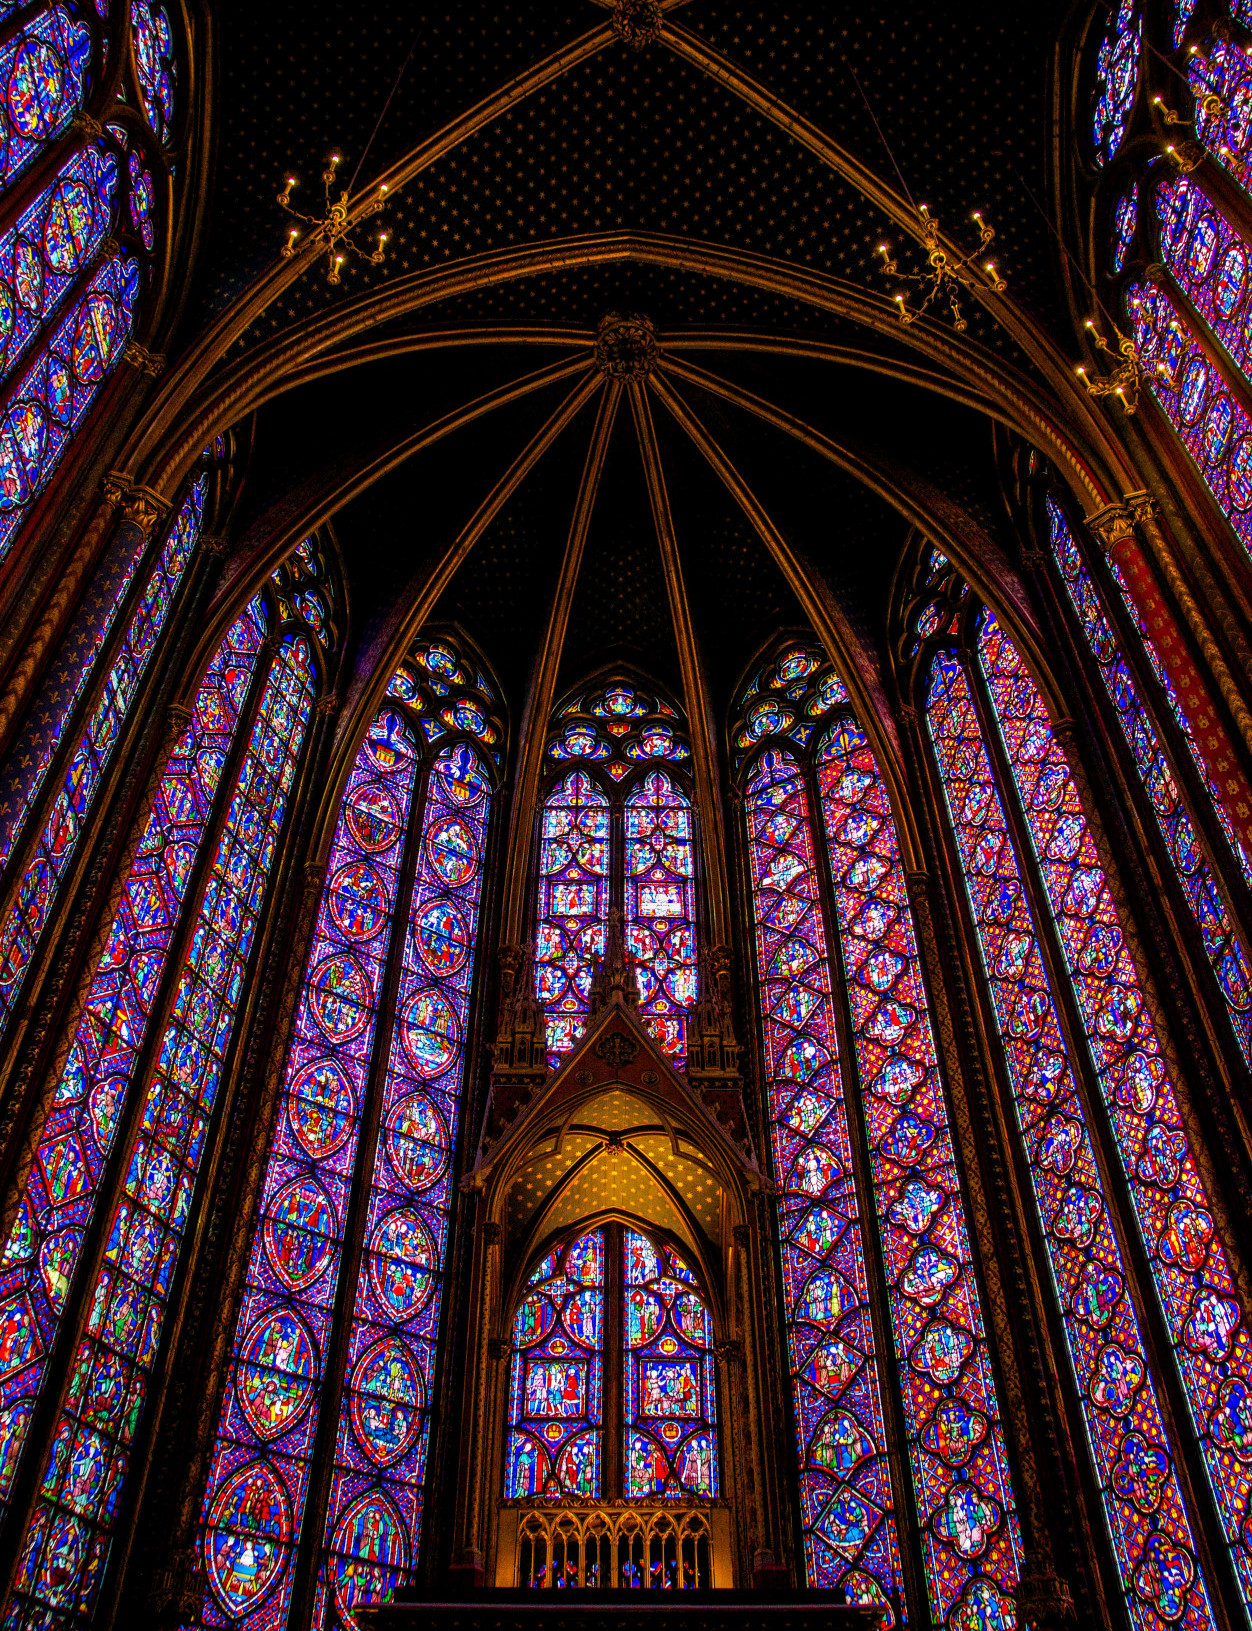 The Sainte-Chapelle in Paris was commissioned by King Louis IX, possibly from architect Pierre of Montreuil between 1242 and 1248 in the Palais de la Cité, then the royal residence.jpg